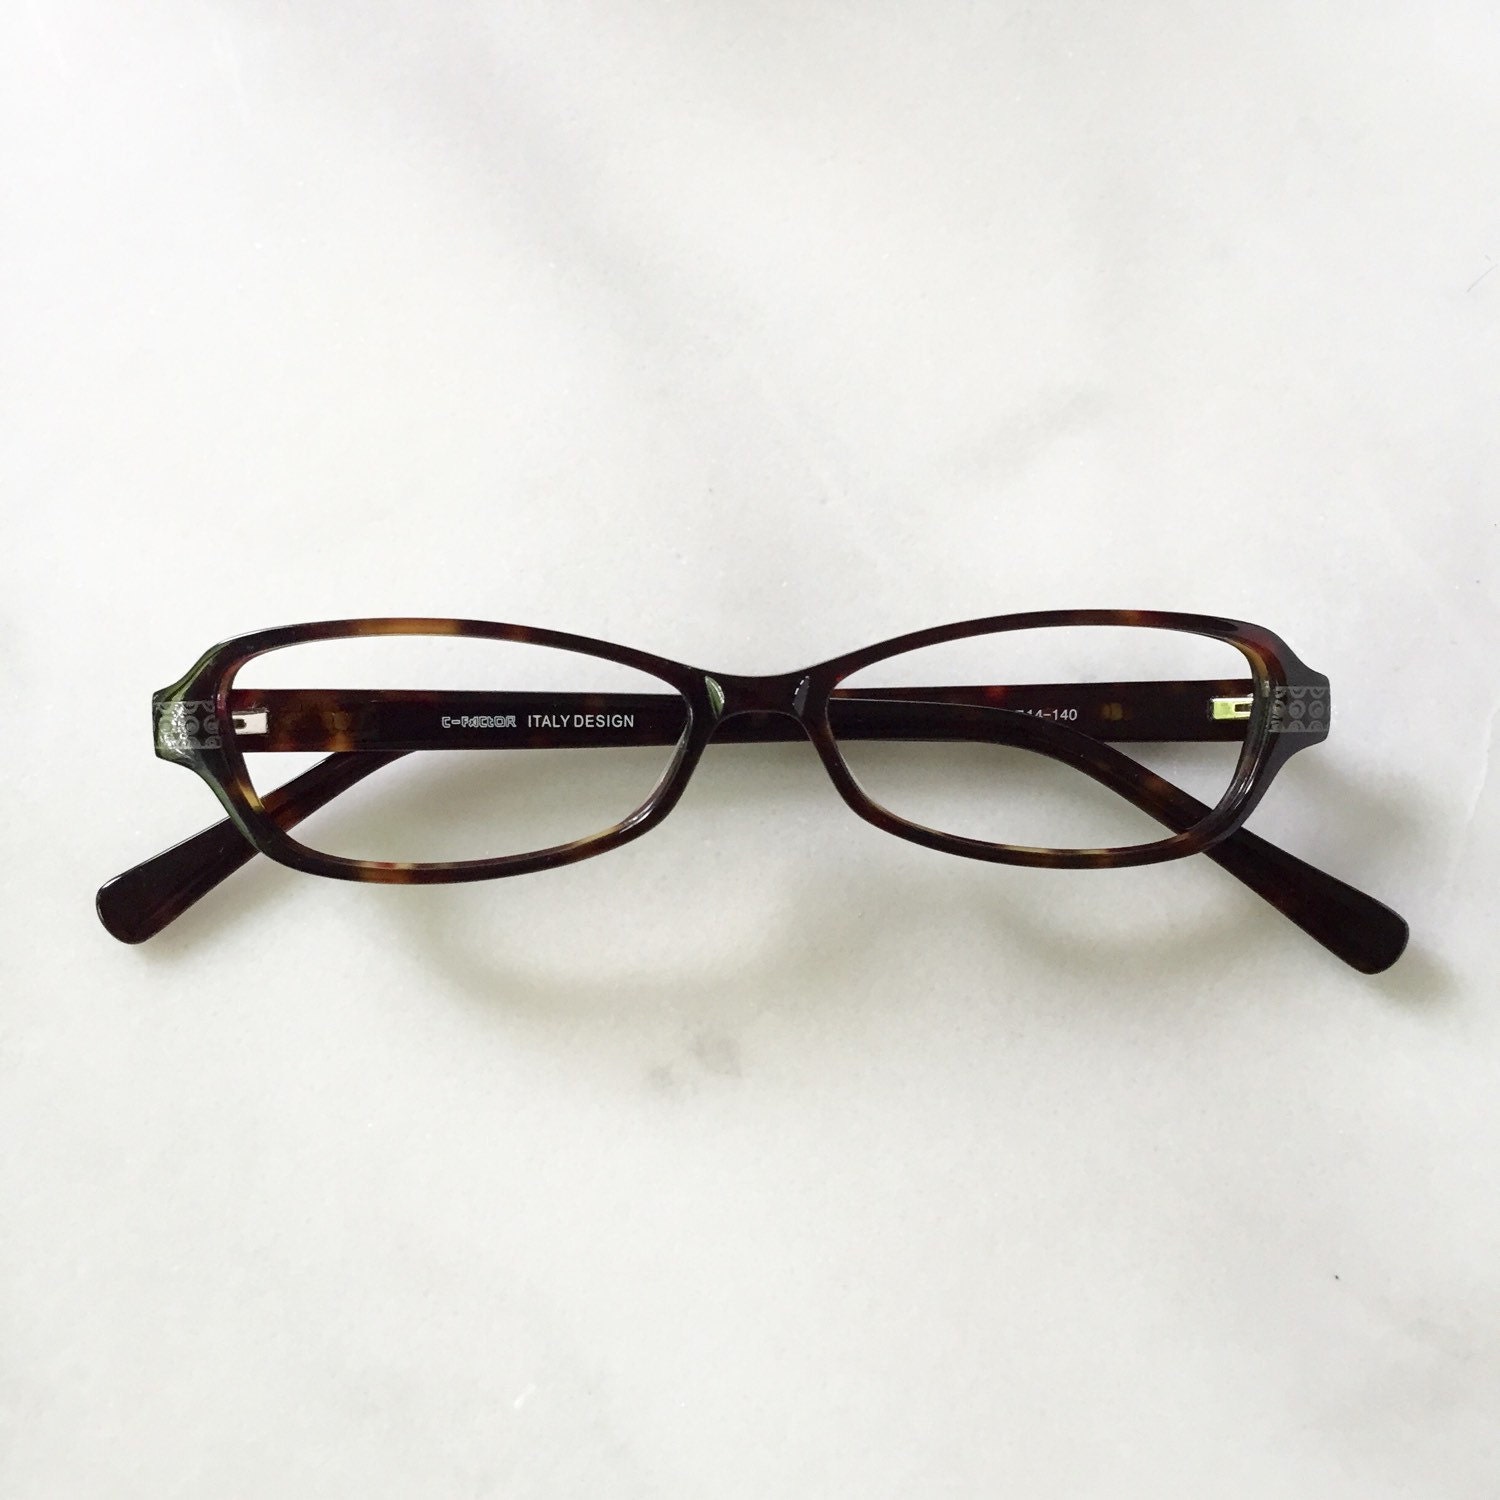 Women's tortoise shell reading glasses with an oval by LookEyewear